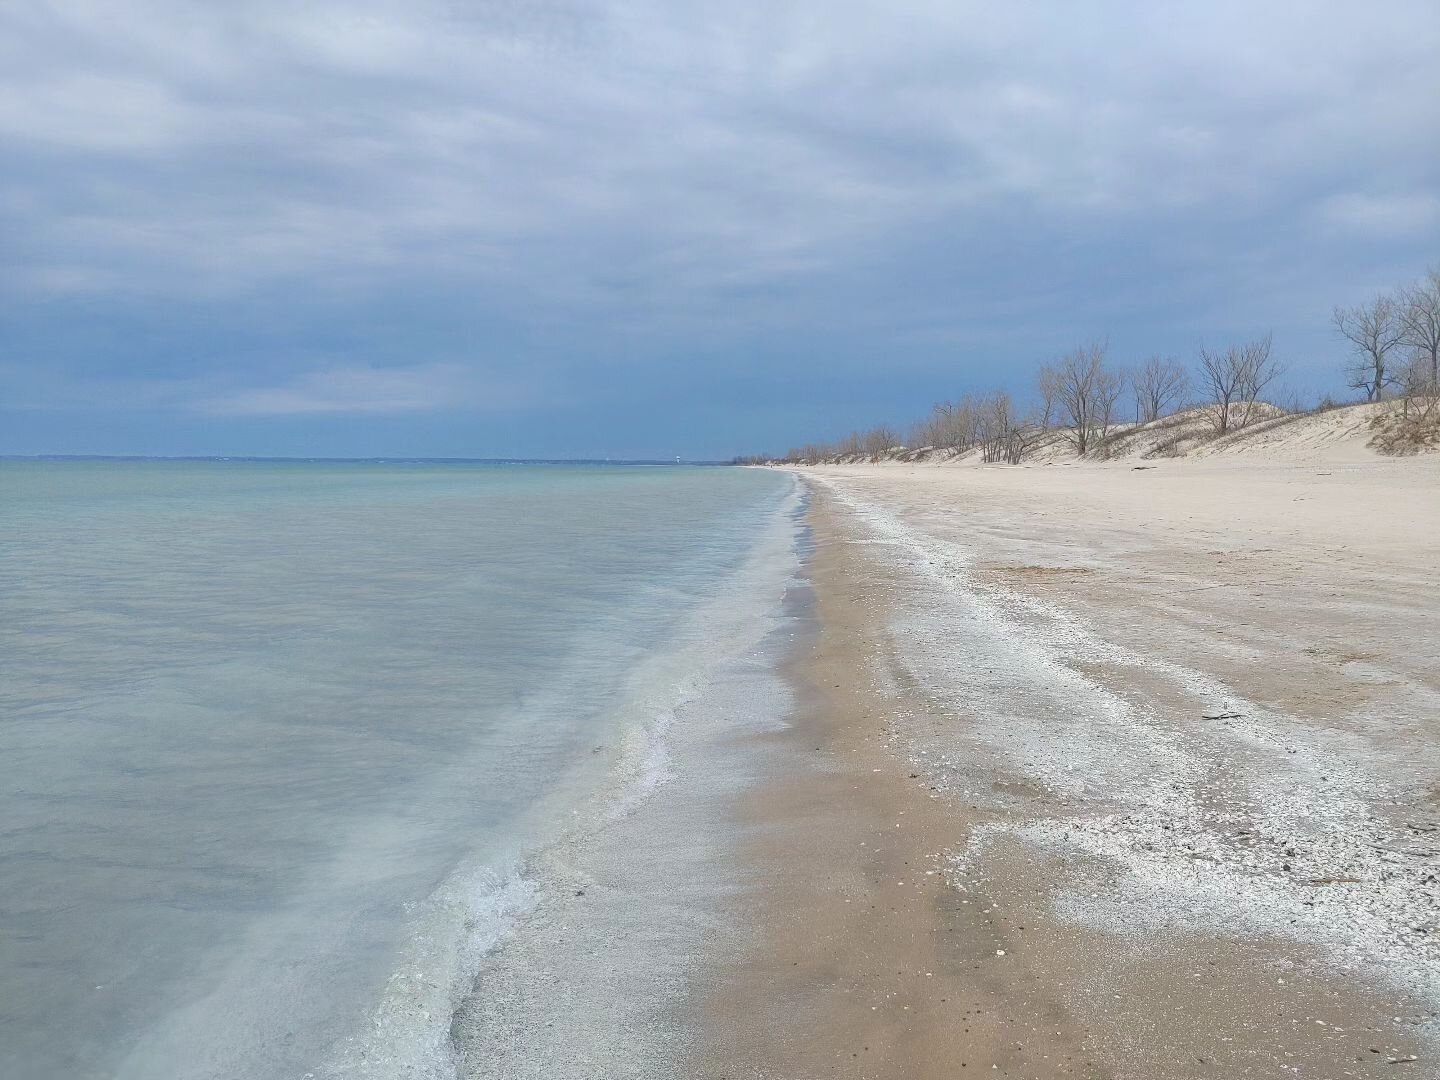 Sometimes I'm even in awe of the beaches we have here #princeedwardcounty #beachlifestyle